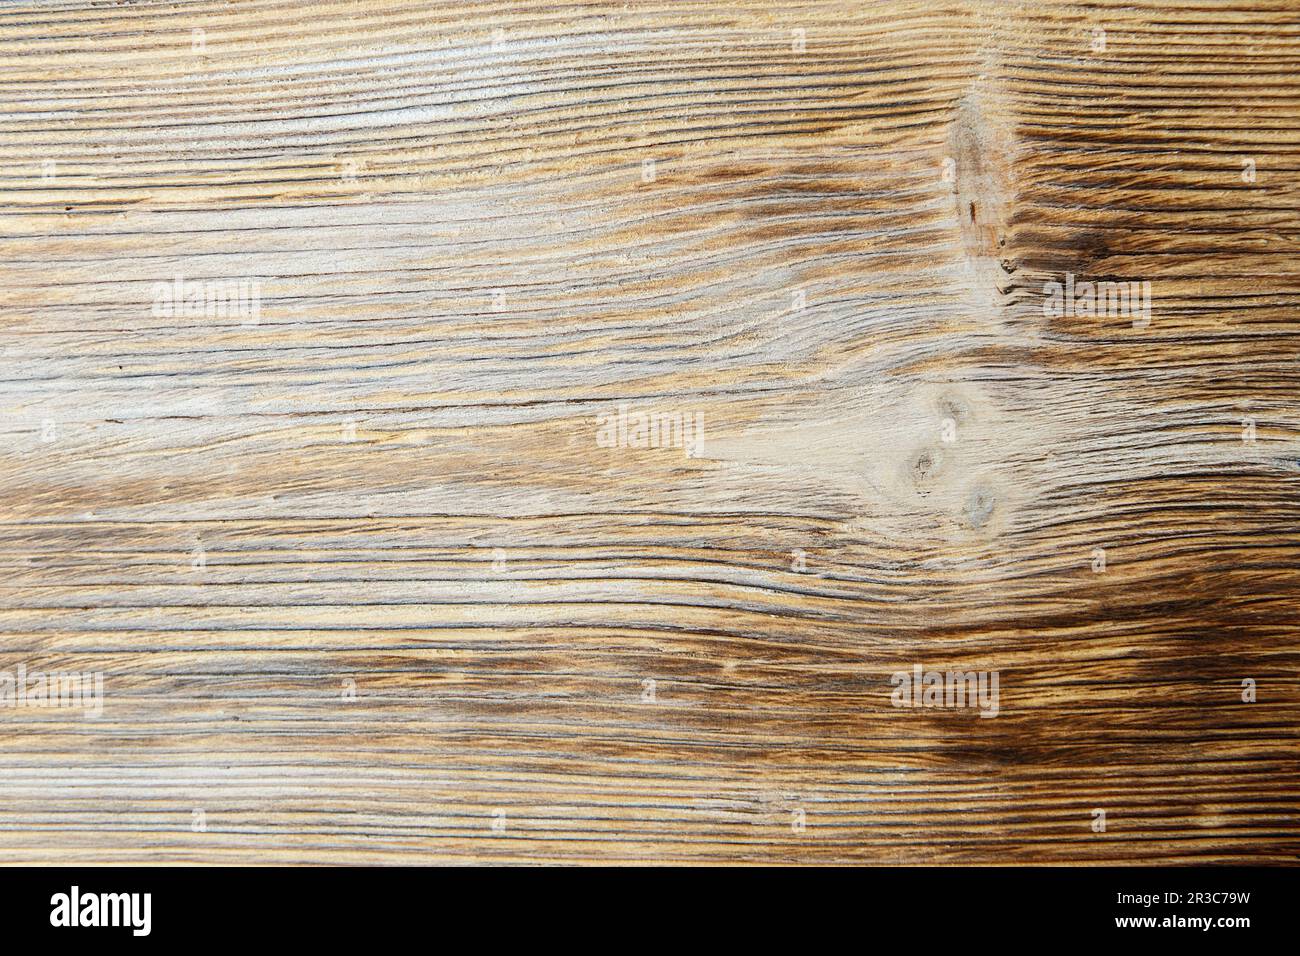 Wooden background texture. Brown scratched wooden cutting board. Wood texture Stock Photo